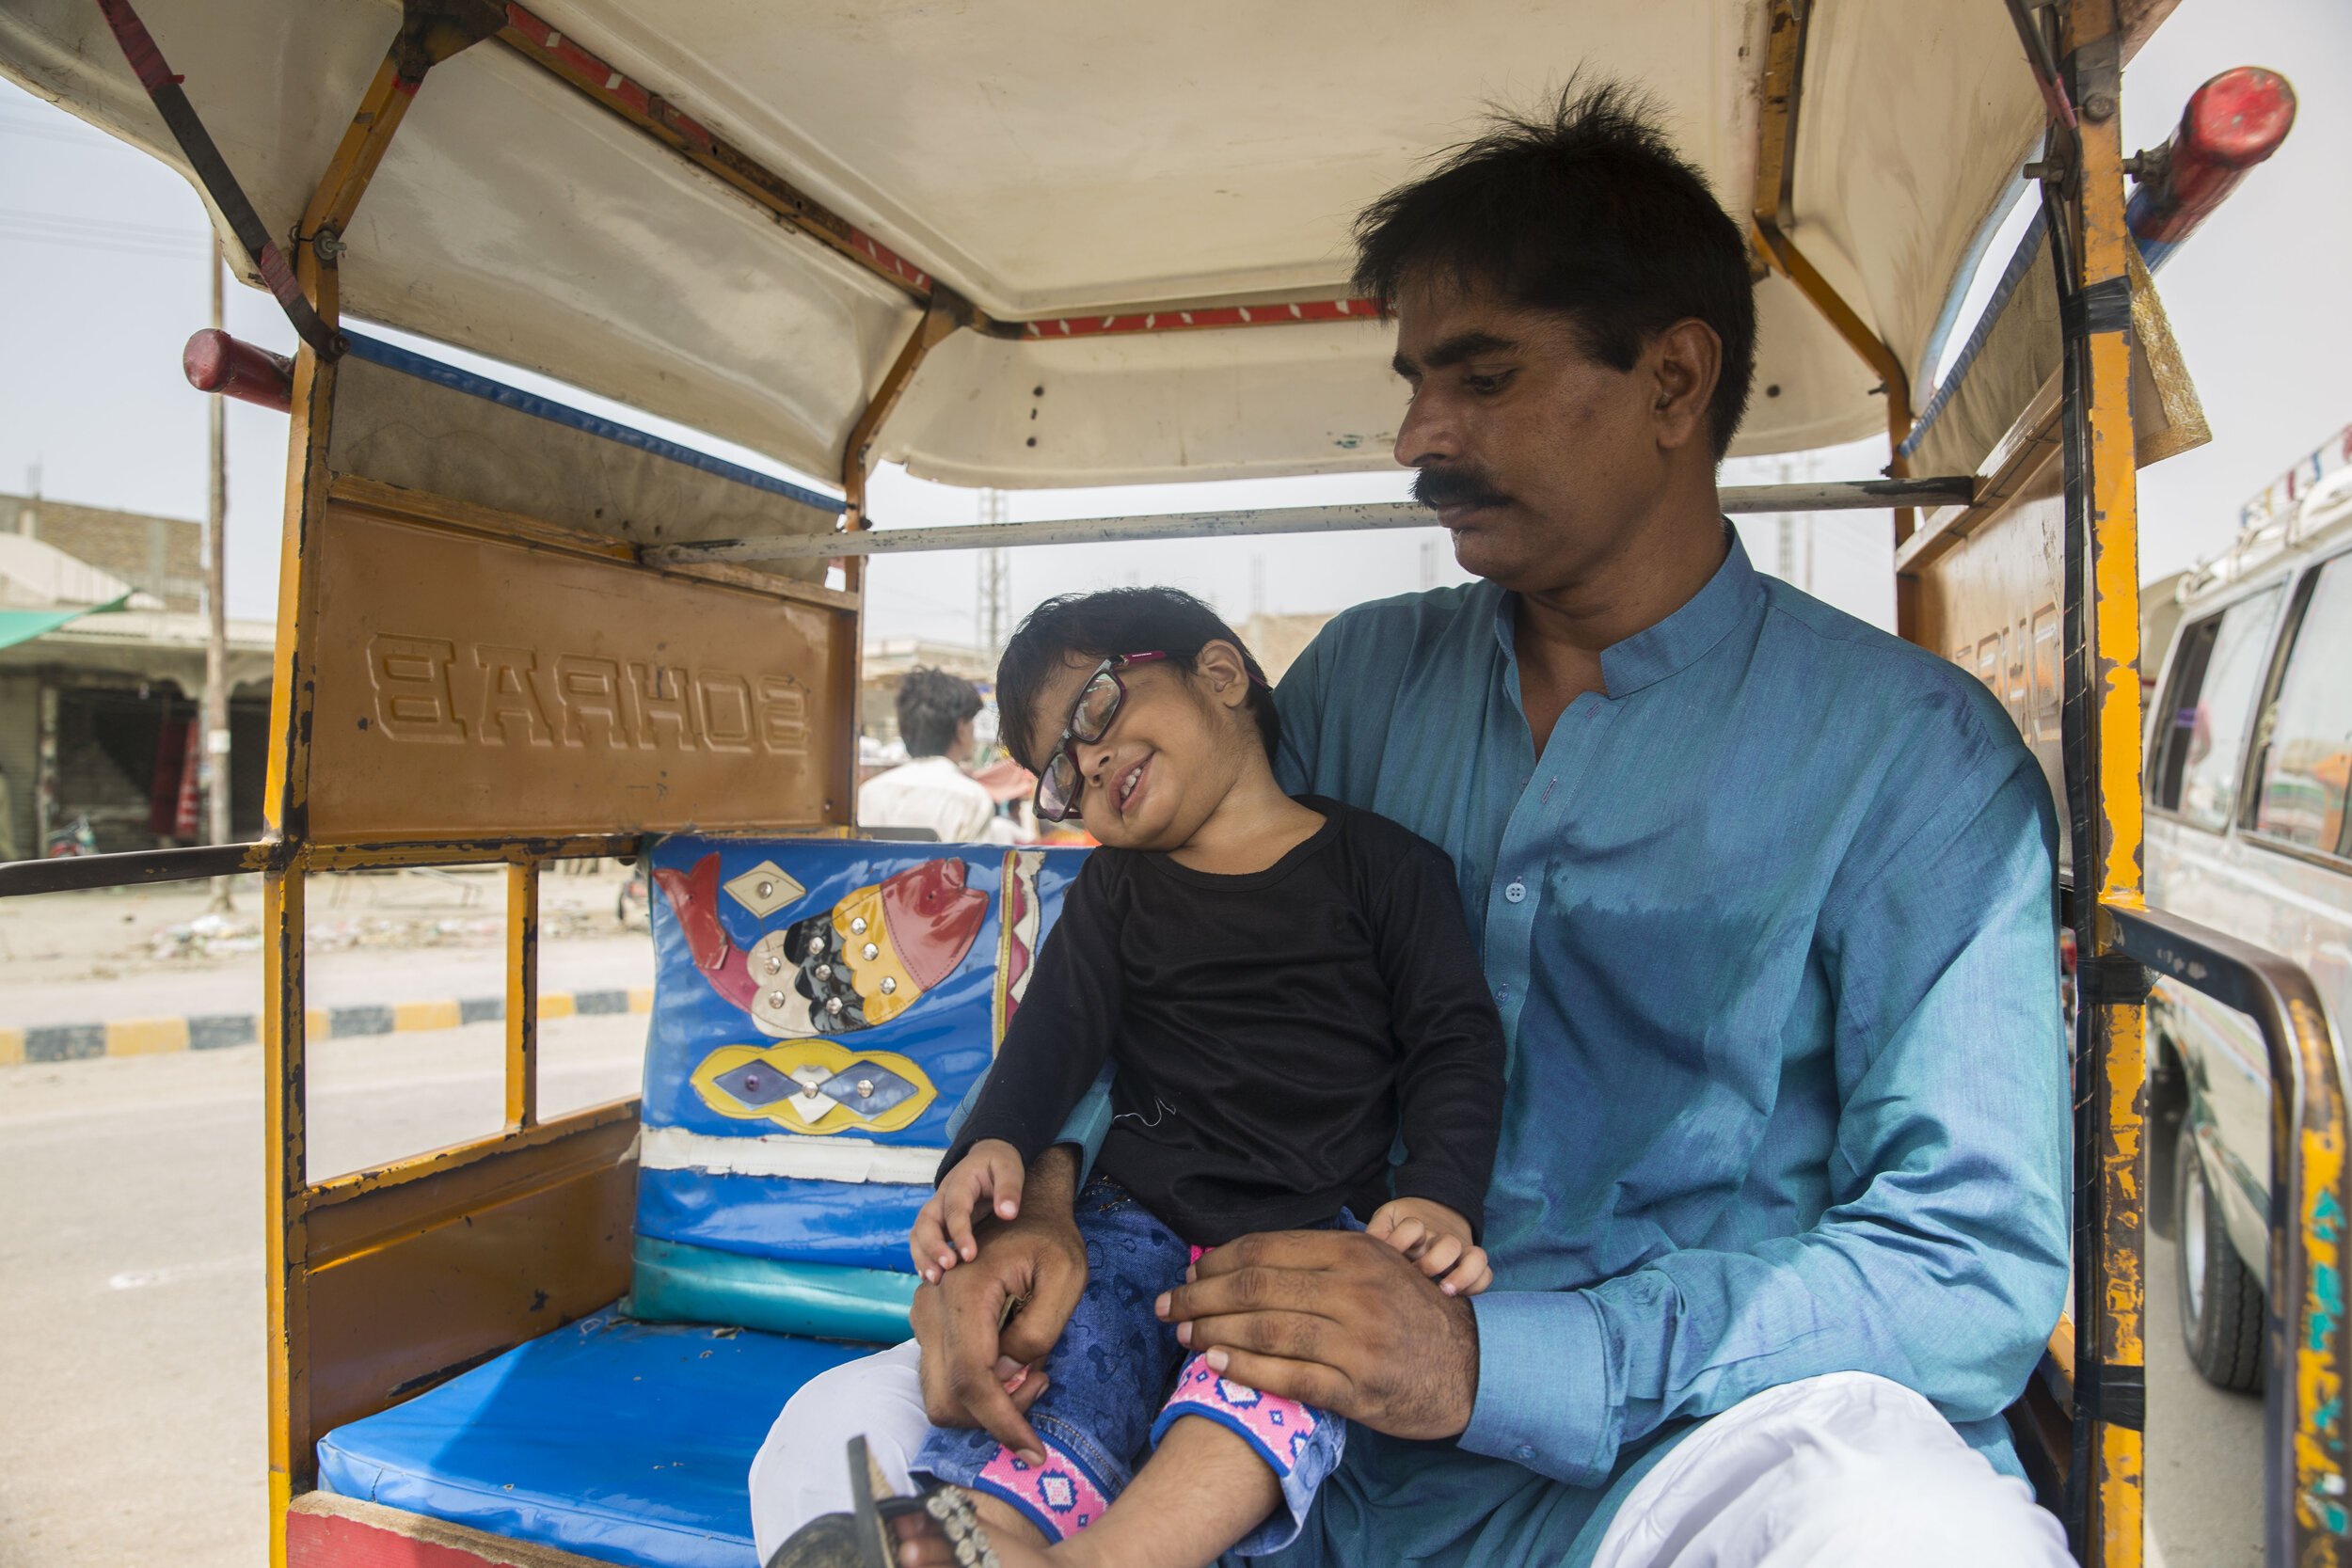  2-year-old Rida Batool who has been diagnosed with HIV along with her father Gulbahar Sheikh reaches Larkana for her medical test after a 30 km journey and takes a rickshaw for another 10 km on July 26, 2019 in Larkana, Sind, Pakistan. 